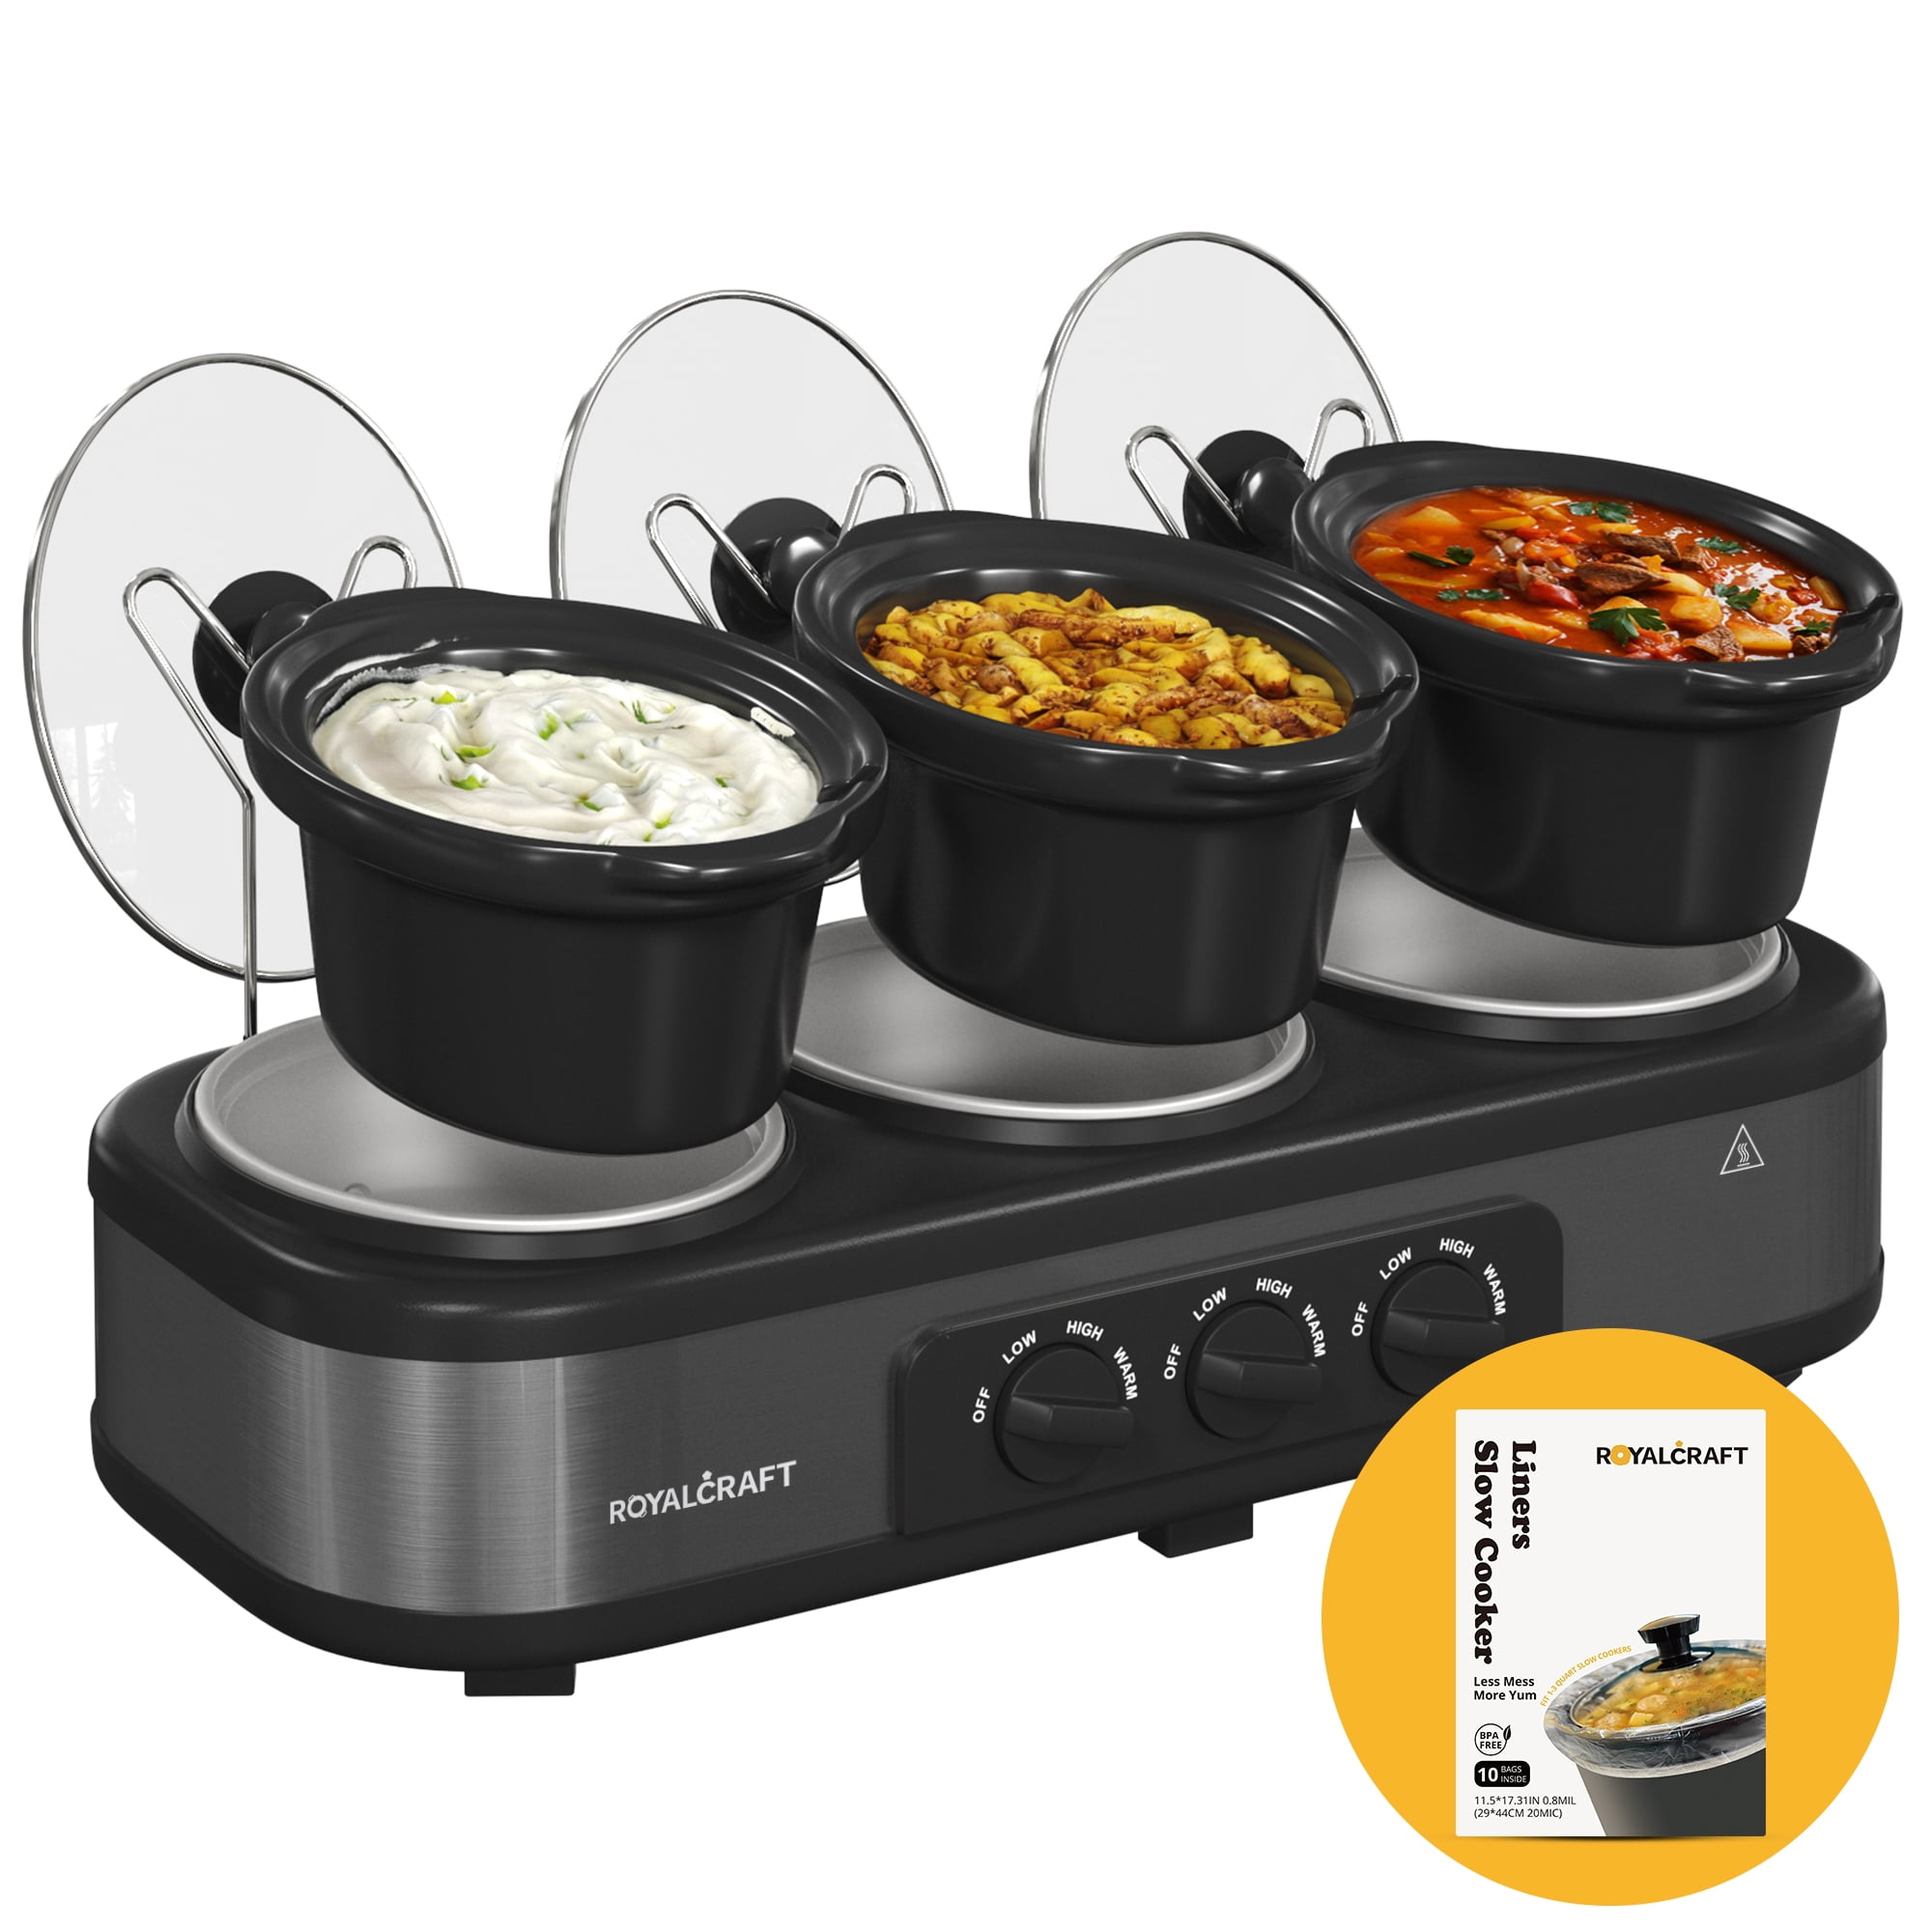 Royalcraft Slow Cooker with 10 Cooking Liners, 3 in 1 Buffet Servers Dips Pot, Food Warmers for Parties with 3 Spoons, Lid Rests, Removable Oval